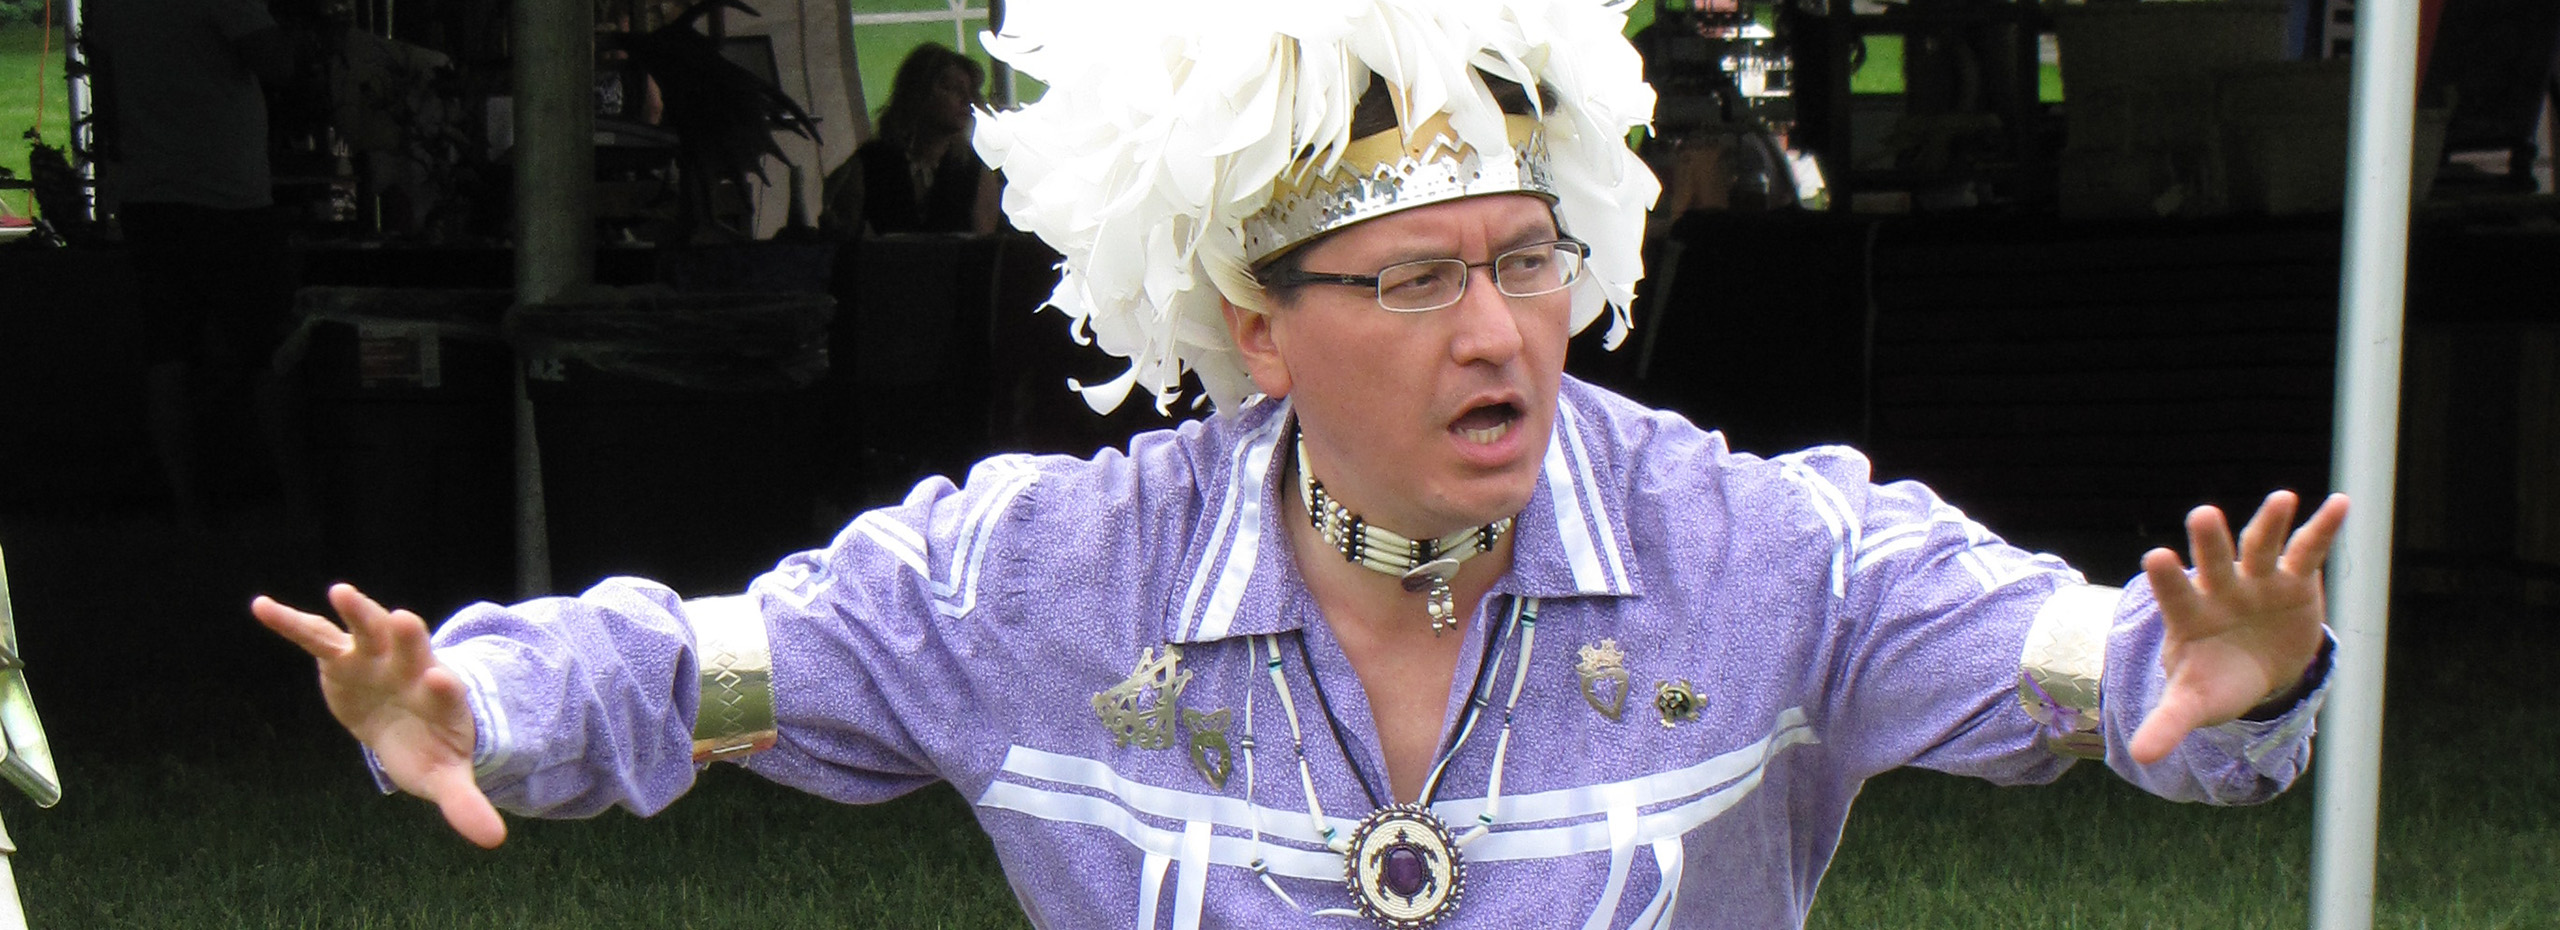 A man wears a white headdress, glasses, beaded necklaces, silver jewelry, and a purple shirt with white stripes while he opens his arms wide in the middle of telling a story